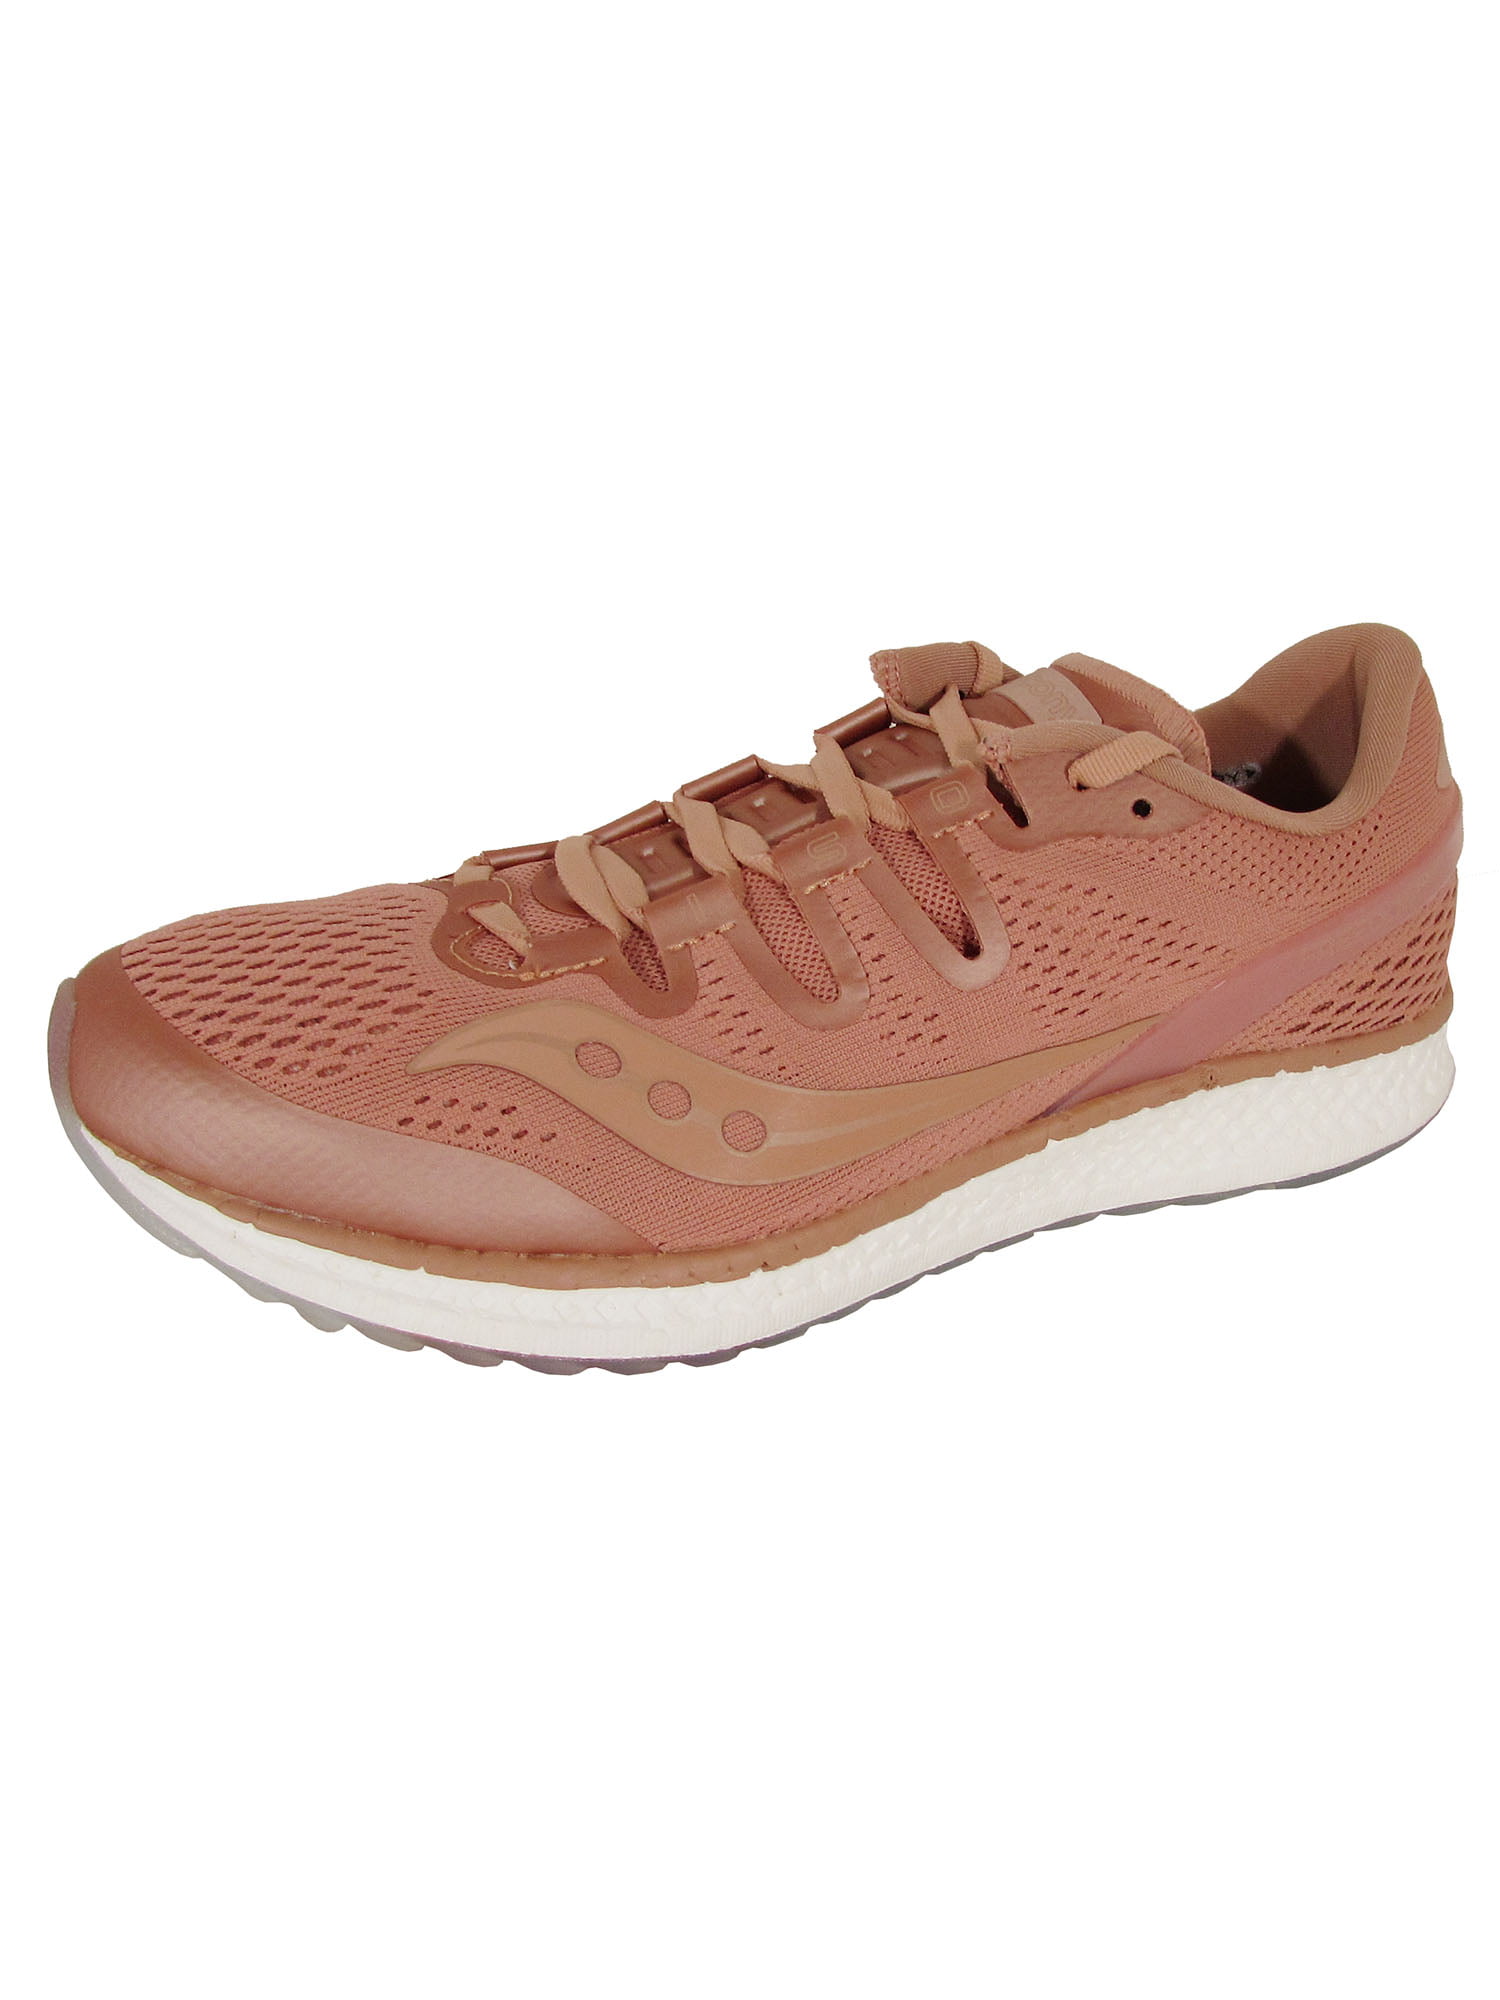 Brown Saucony Freedom ISO Mens Running Shoes 